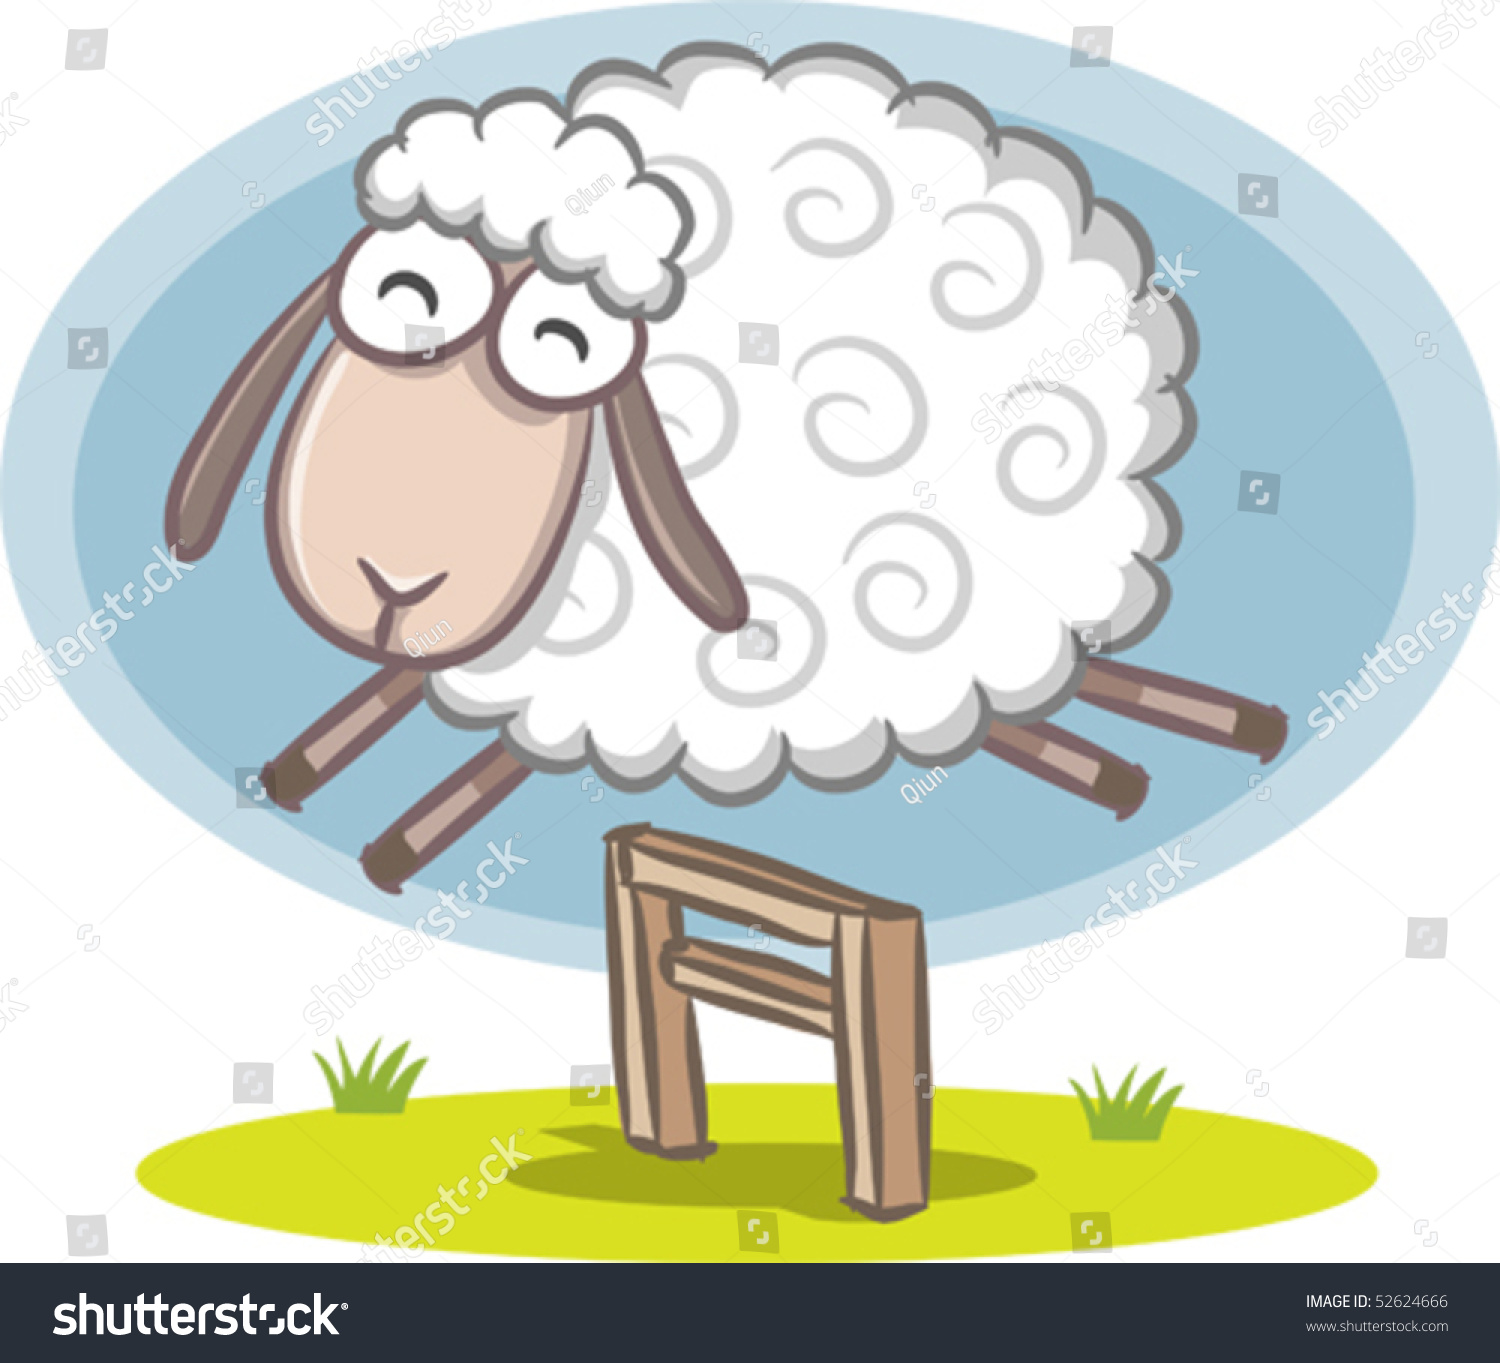 stock-vector-illustration-of-sheep-jumping-over-the-fence-52624666.jpg